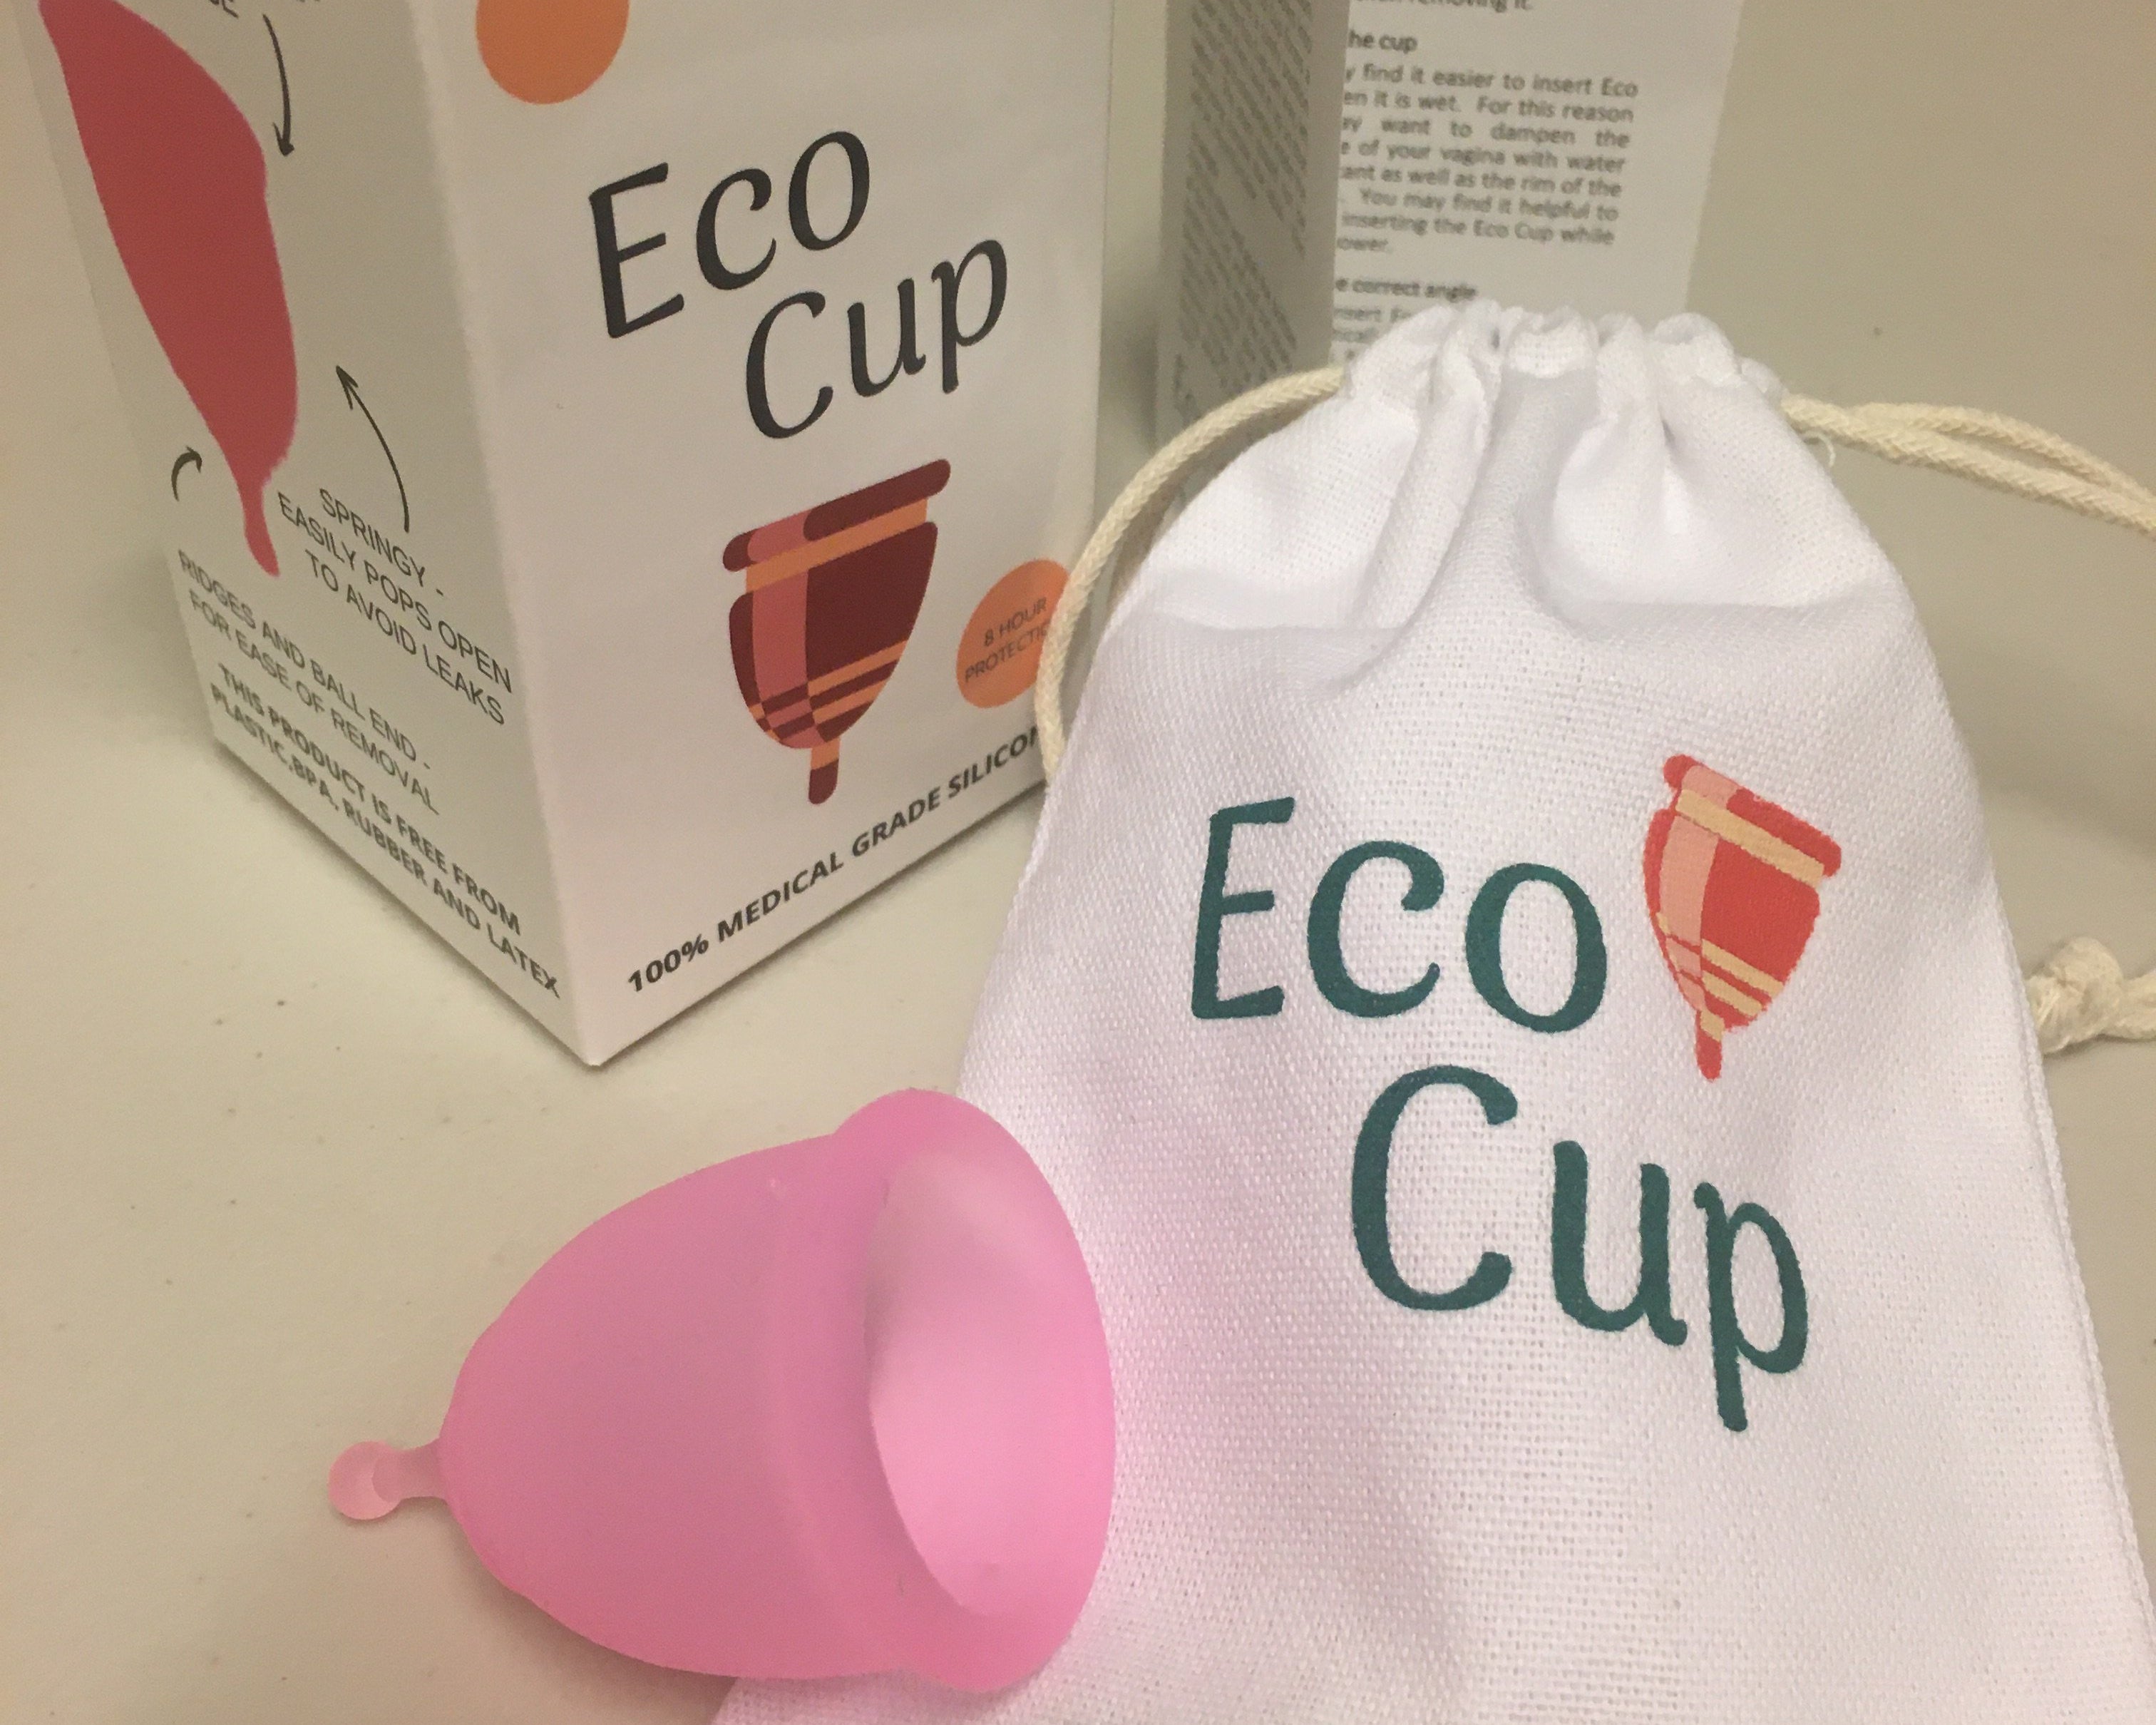 Menstrual cups and Toxic Shock Syndrome